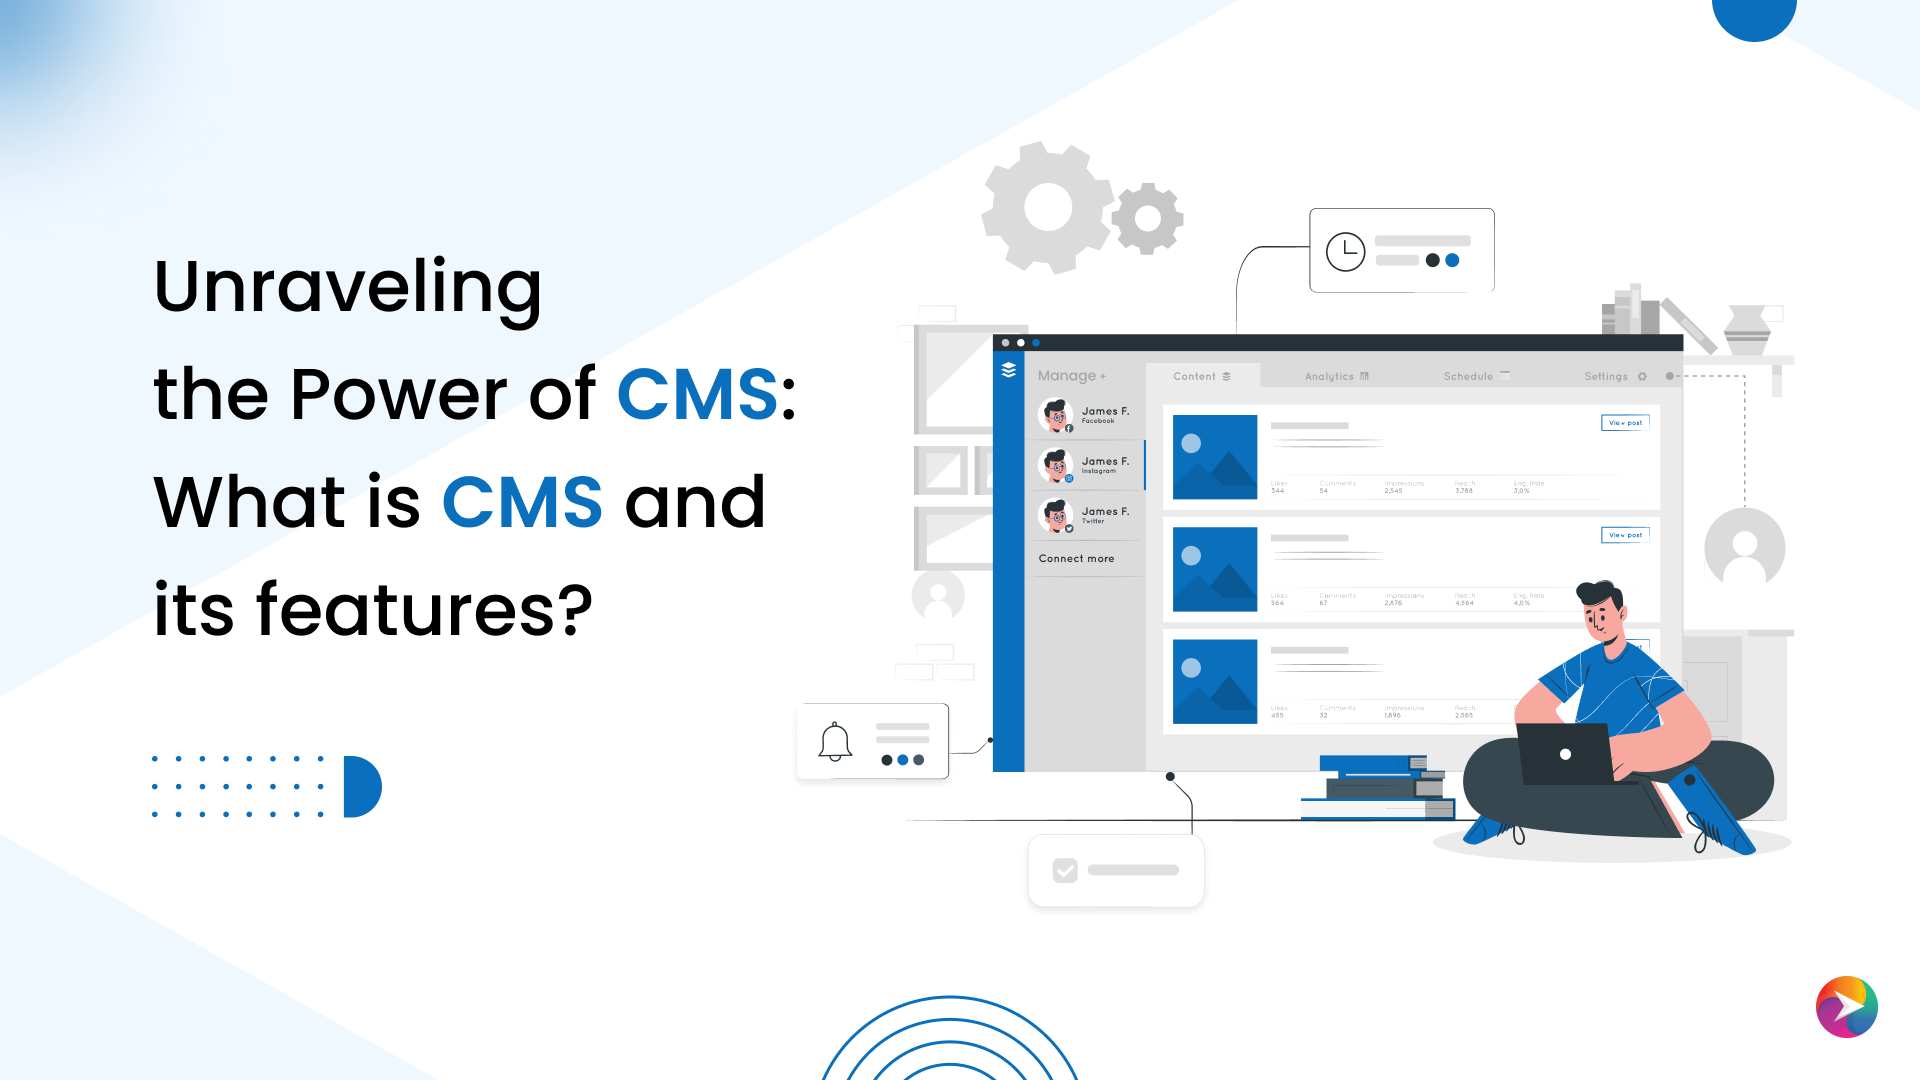 Unraveling the Power of CMS: What is CMS and its features?